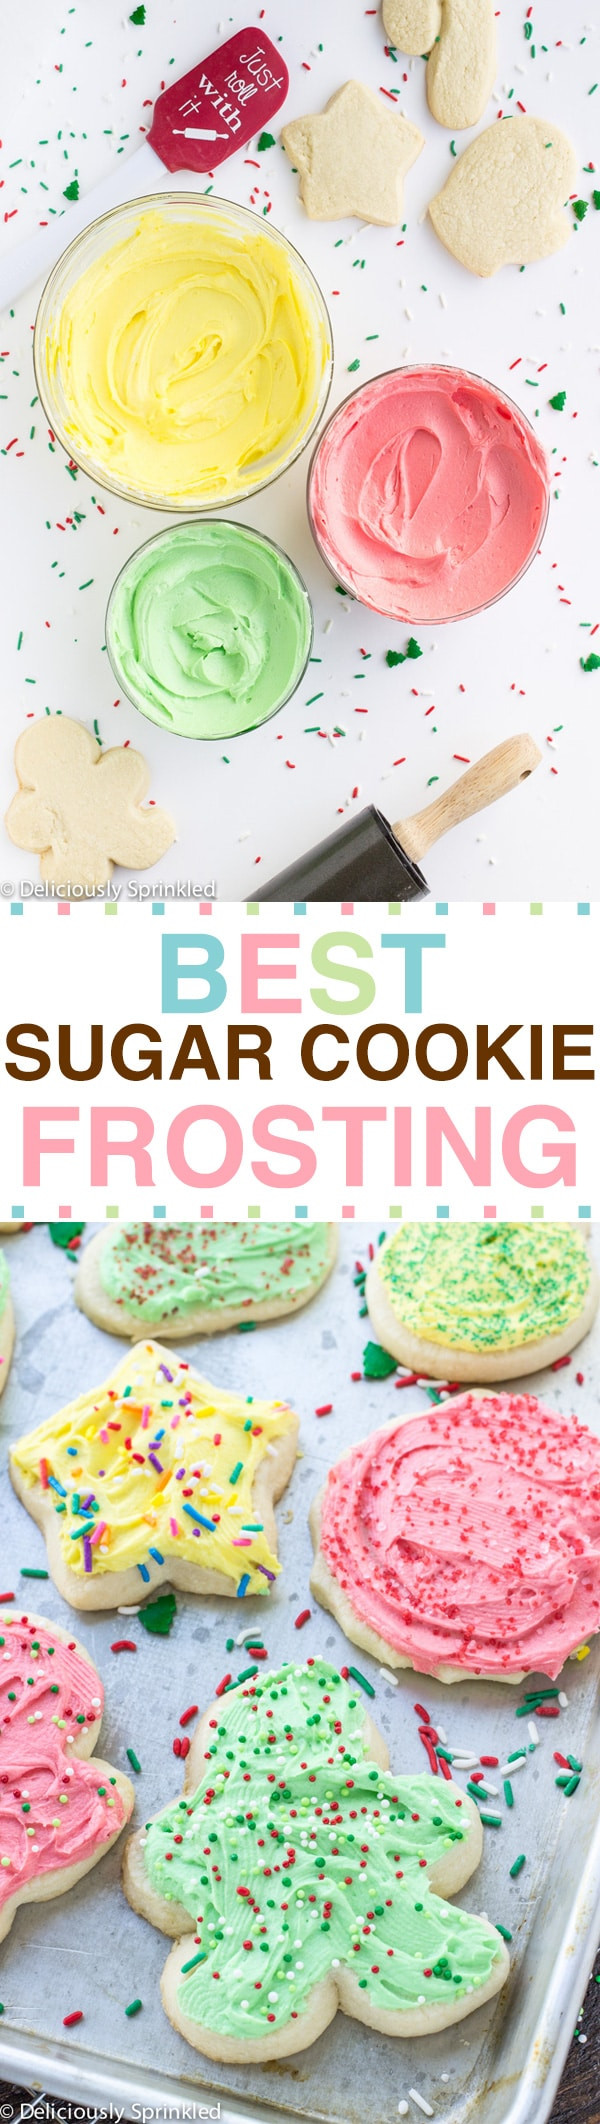 Cookie Frosting Recipes
 The Best Sugar Cookie Frosting